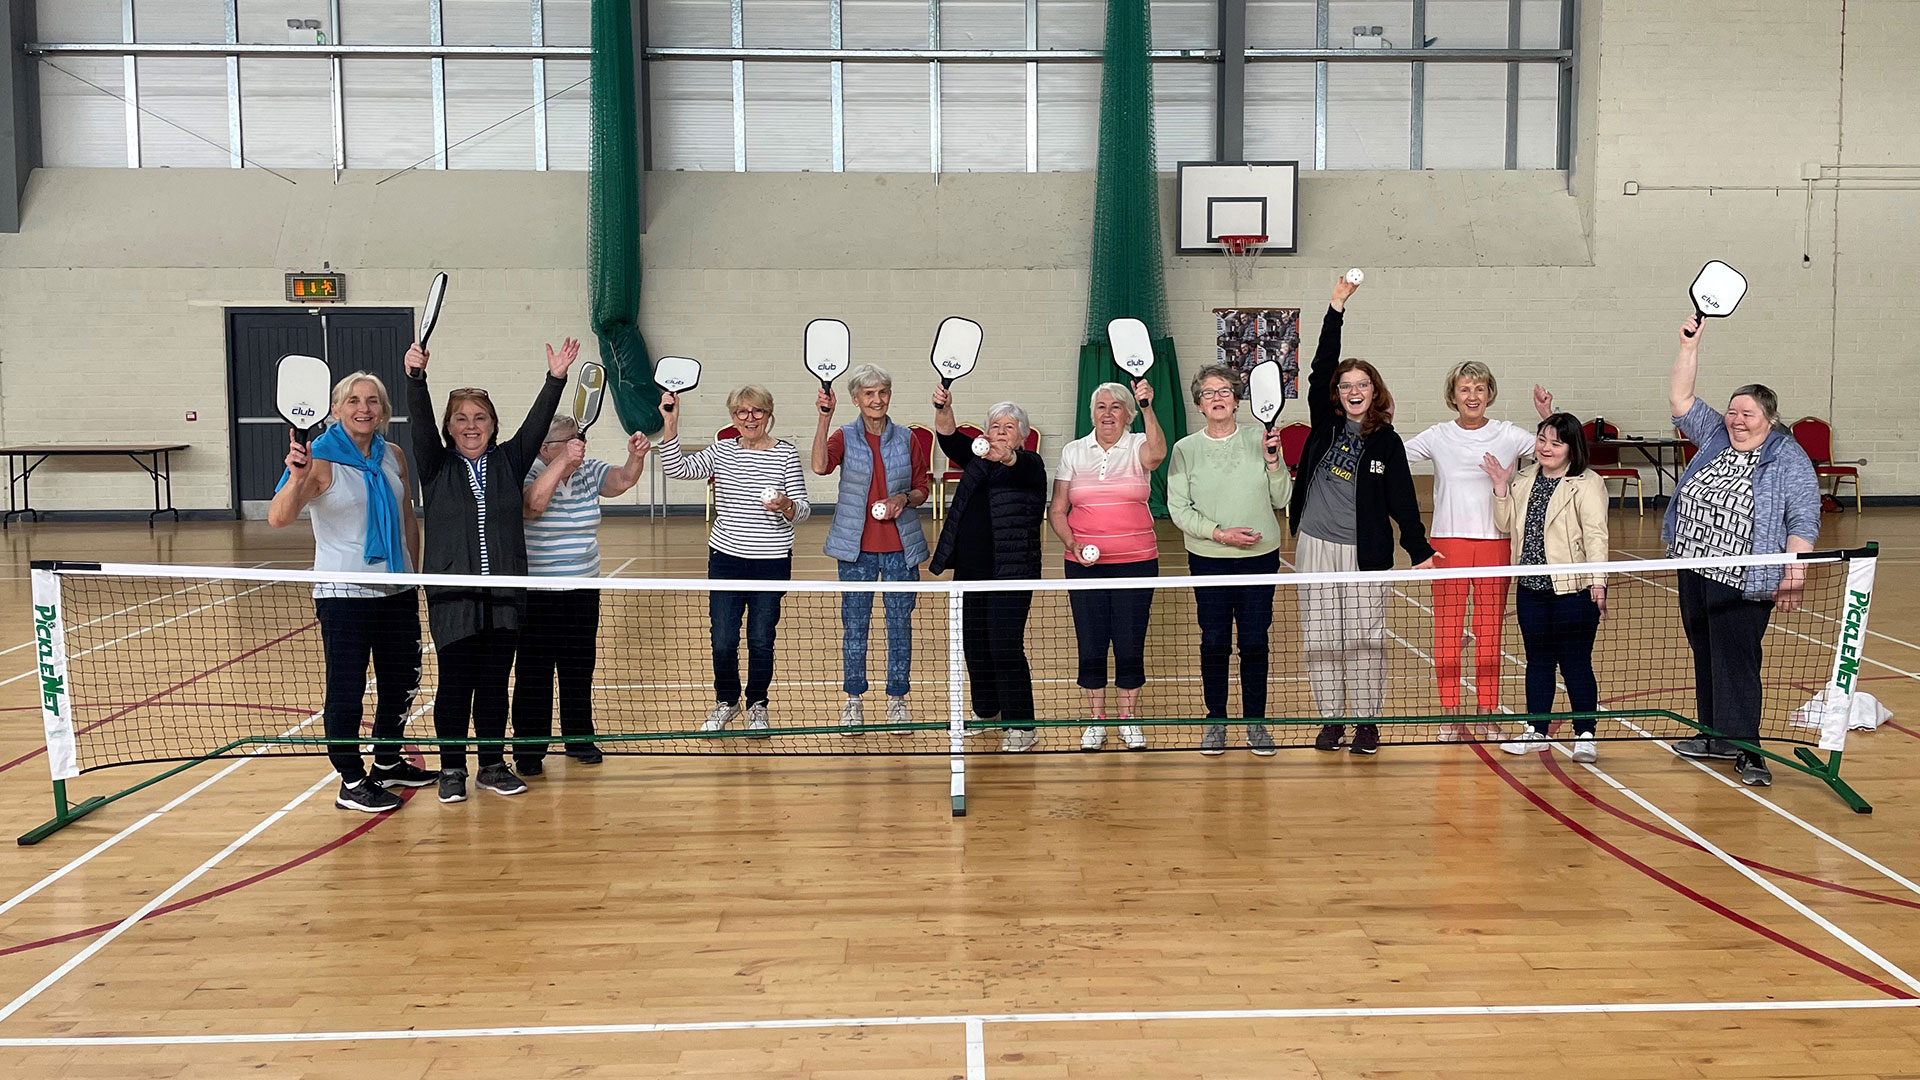 Older People holding rackets